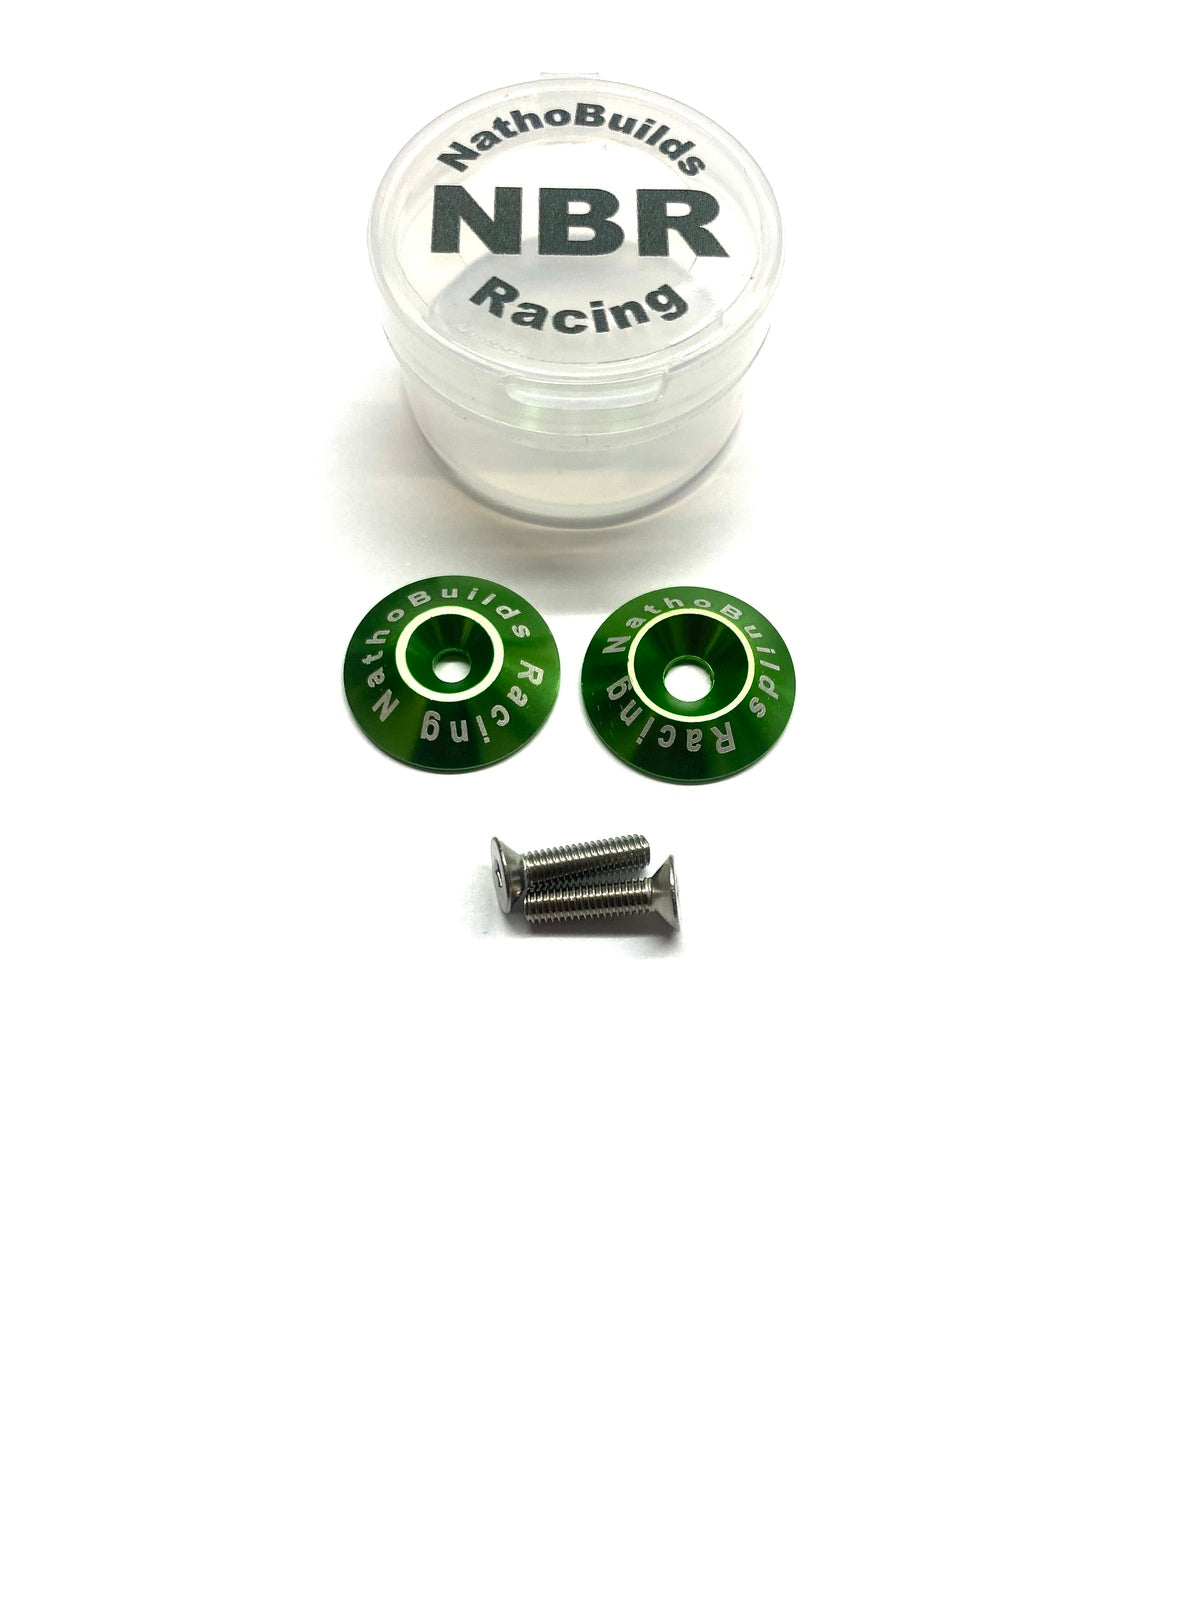 NathoBuilds: Wing Buttons- 2pack (Green)